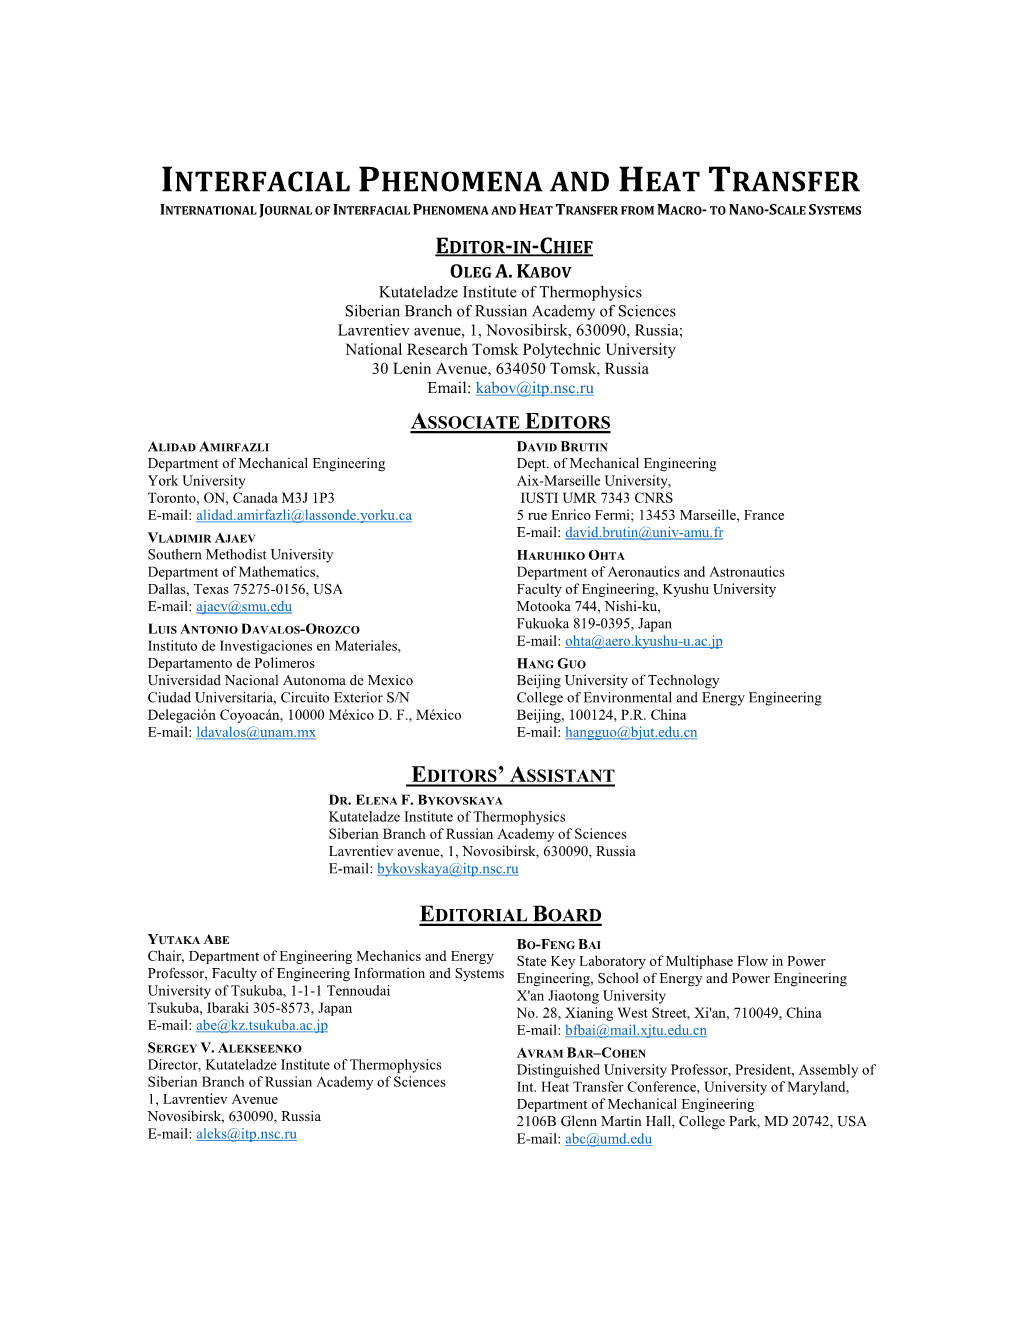 Interfacial Phenomena and Heat Transfer International Journal of Interfacial Phenomena and Heat Transfer from Macro- to Nano-Scale Systems Editor-In-Chief Oleg A